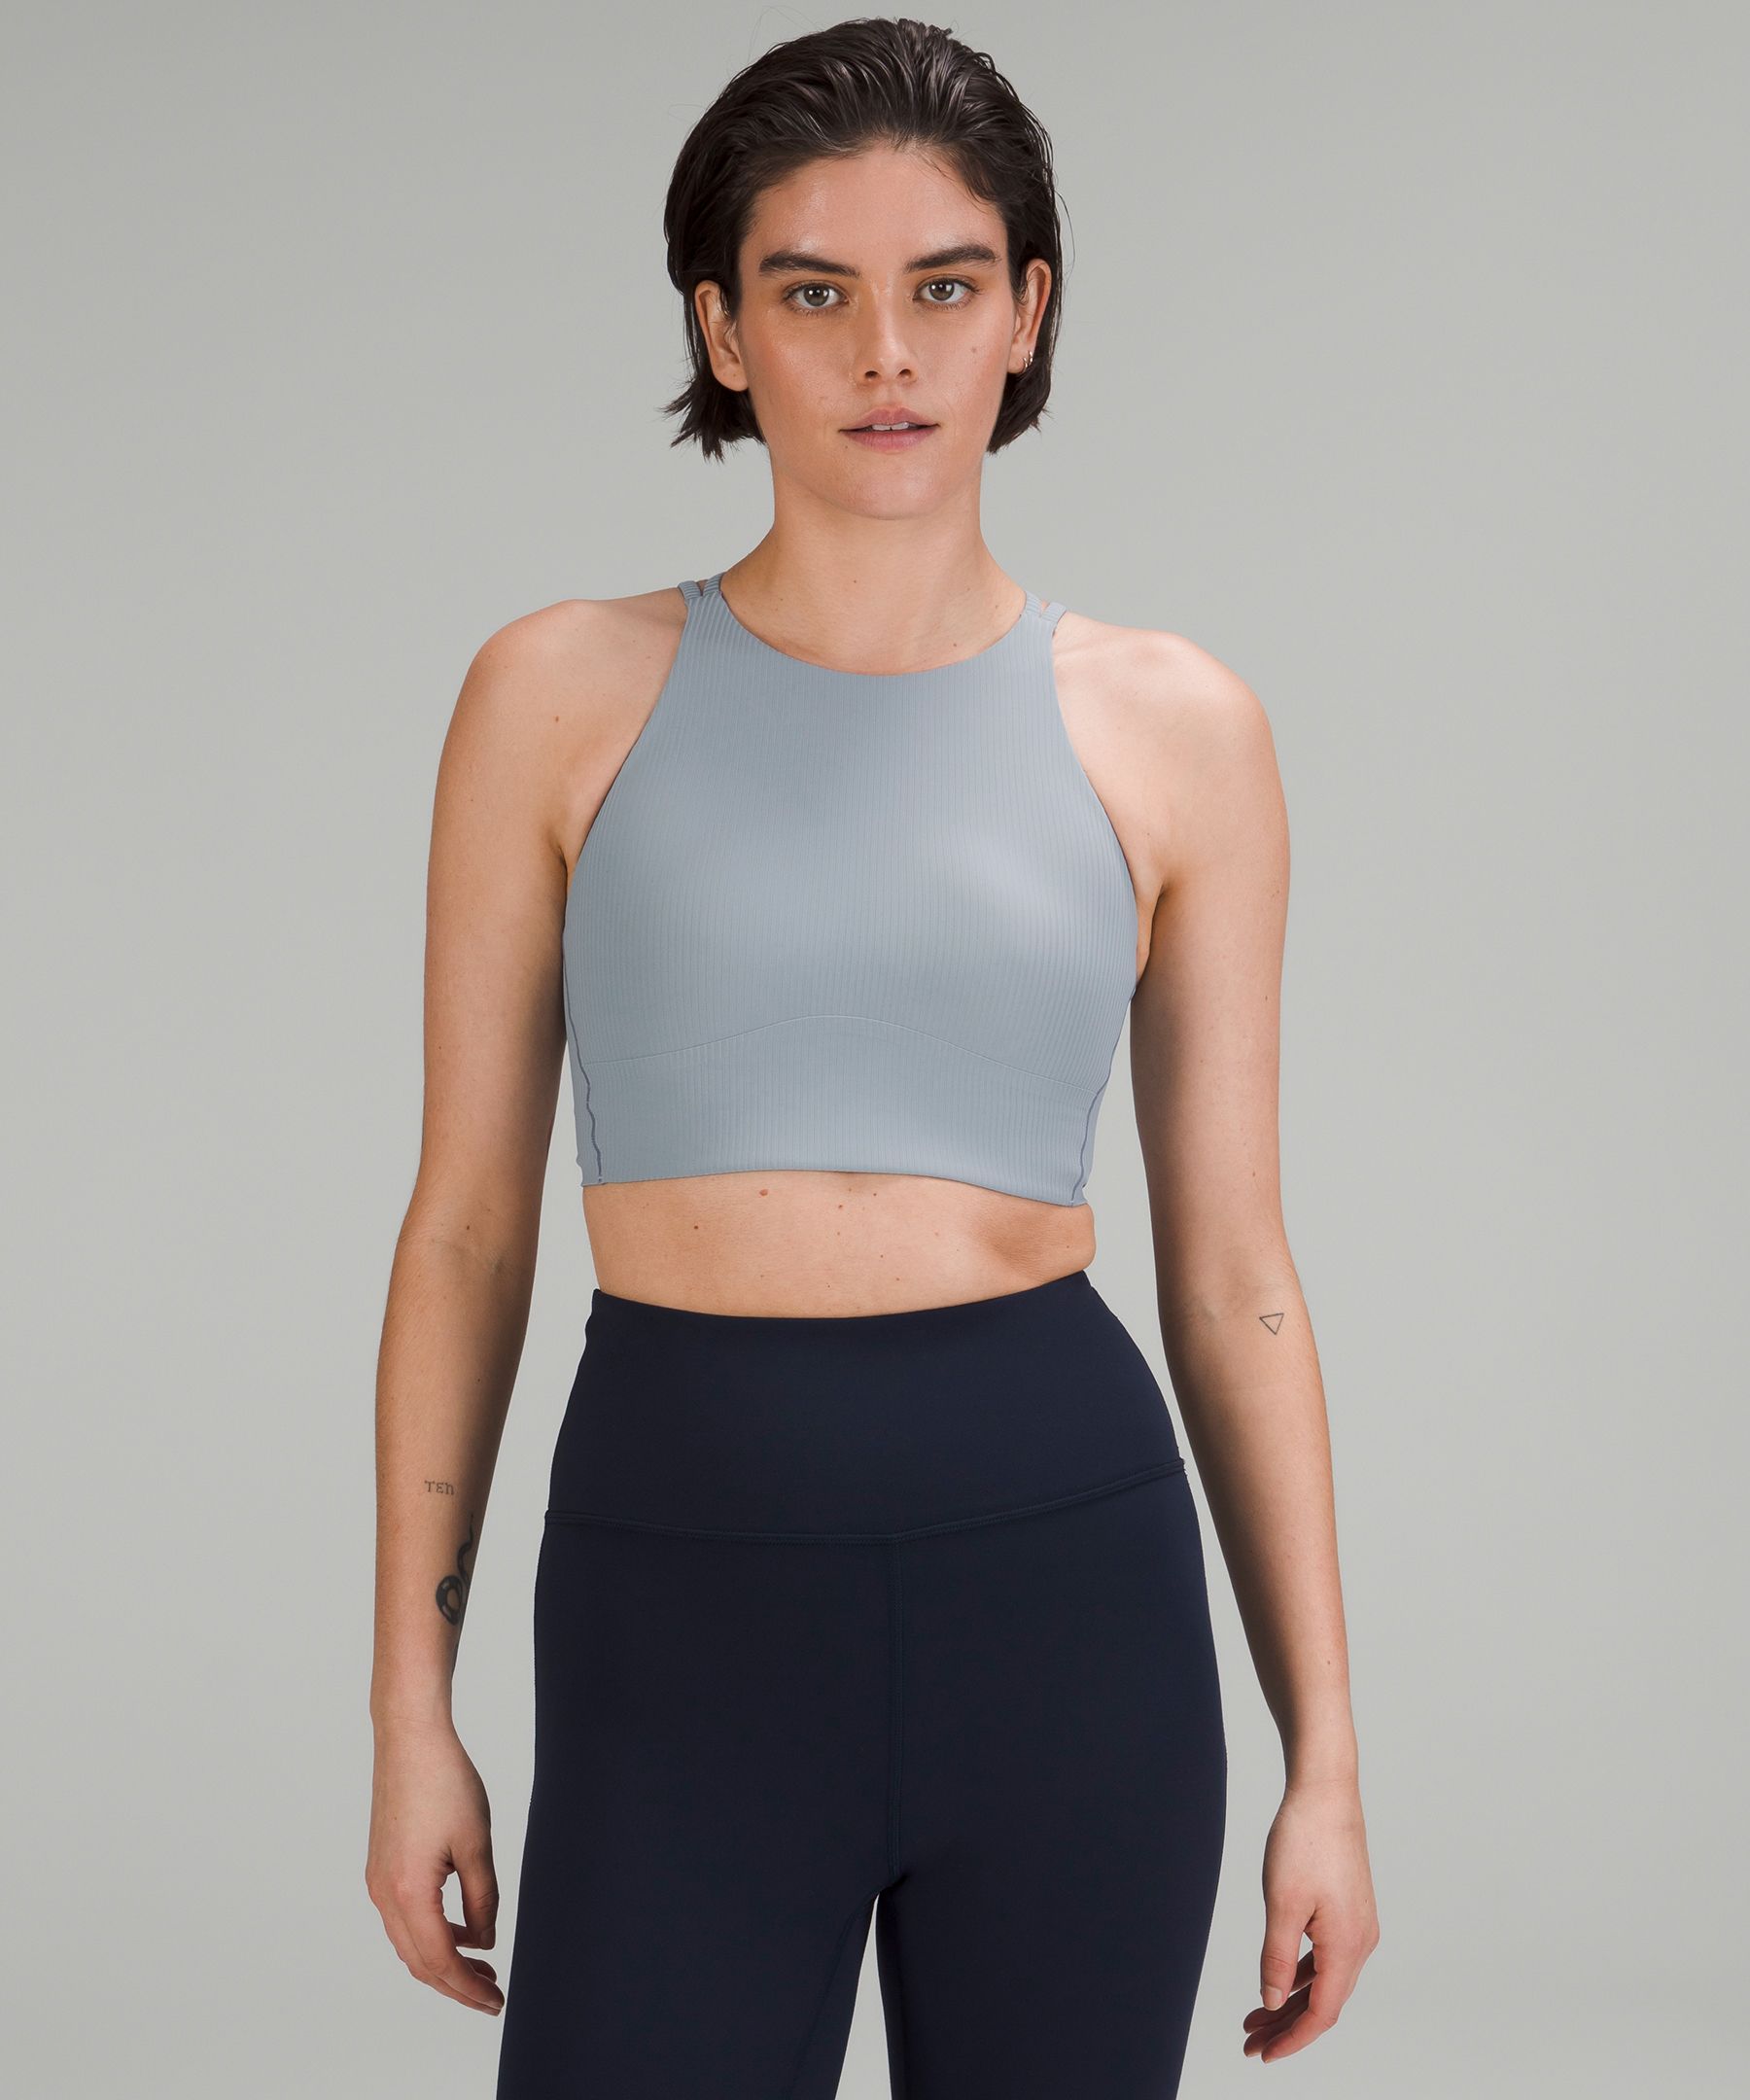 Anyone else find it difficult putting on the Ribbed Longline Yoga